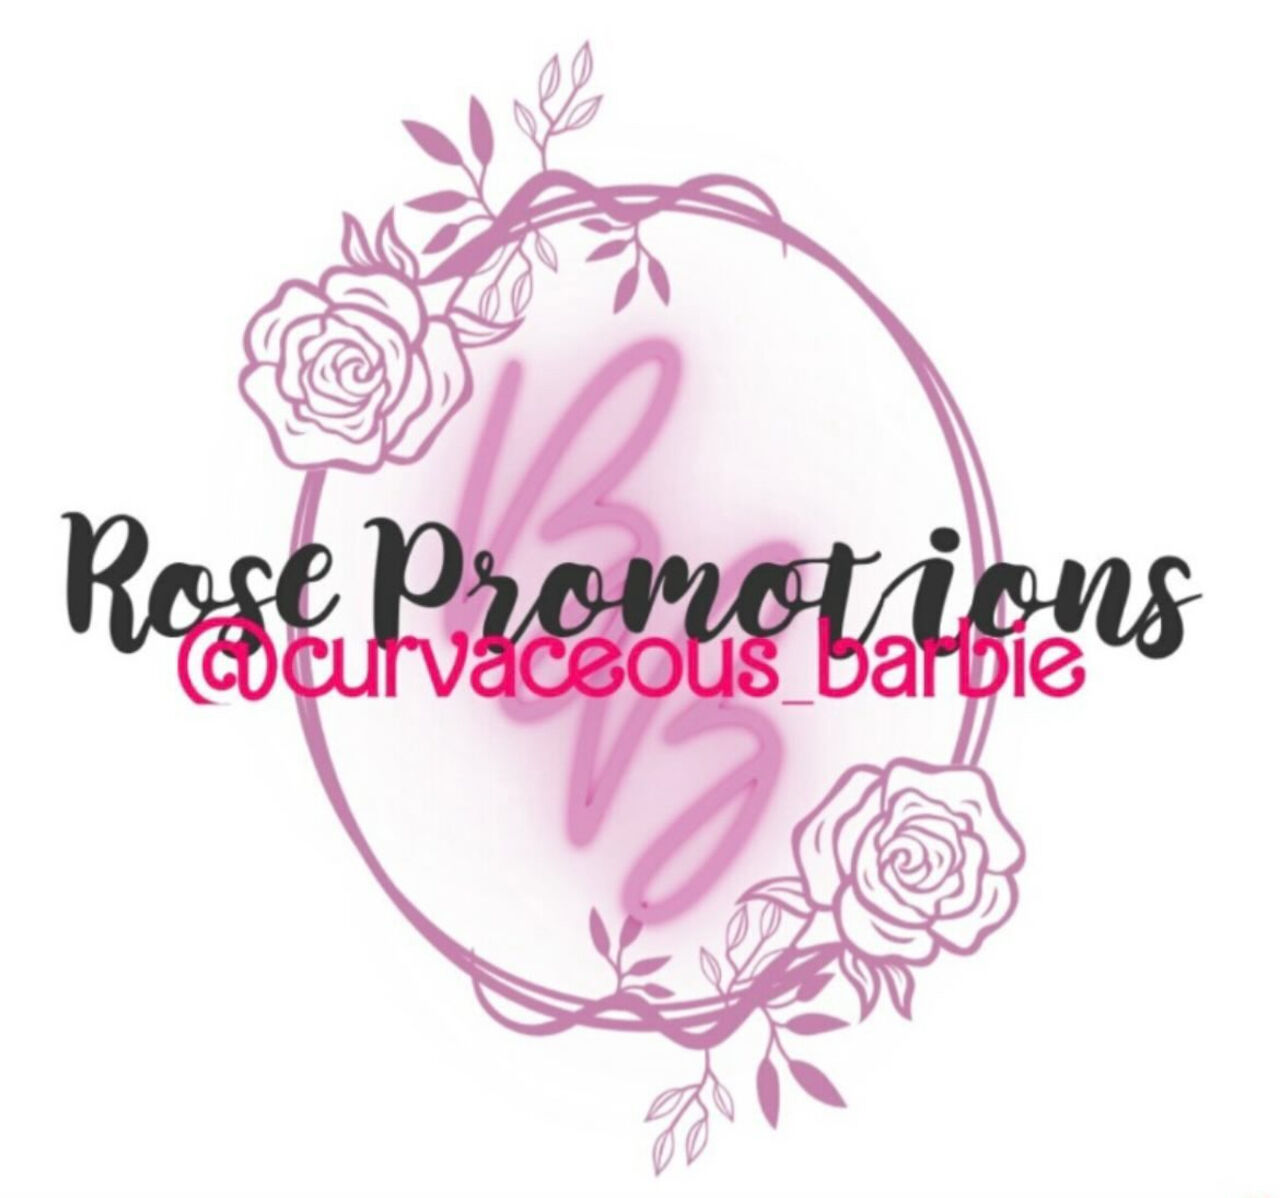 See 𝐆𝐨𝐝𝐝𝐞𝐬𝐬 𝐁𝐫𝐢𝐚𝐧𝐧𝐚 🇨🇦🌹 ©Rose Promotions profile